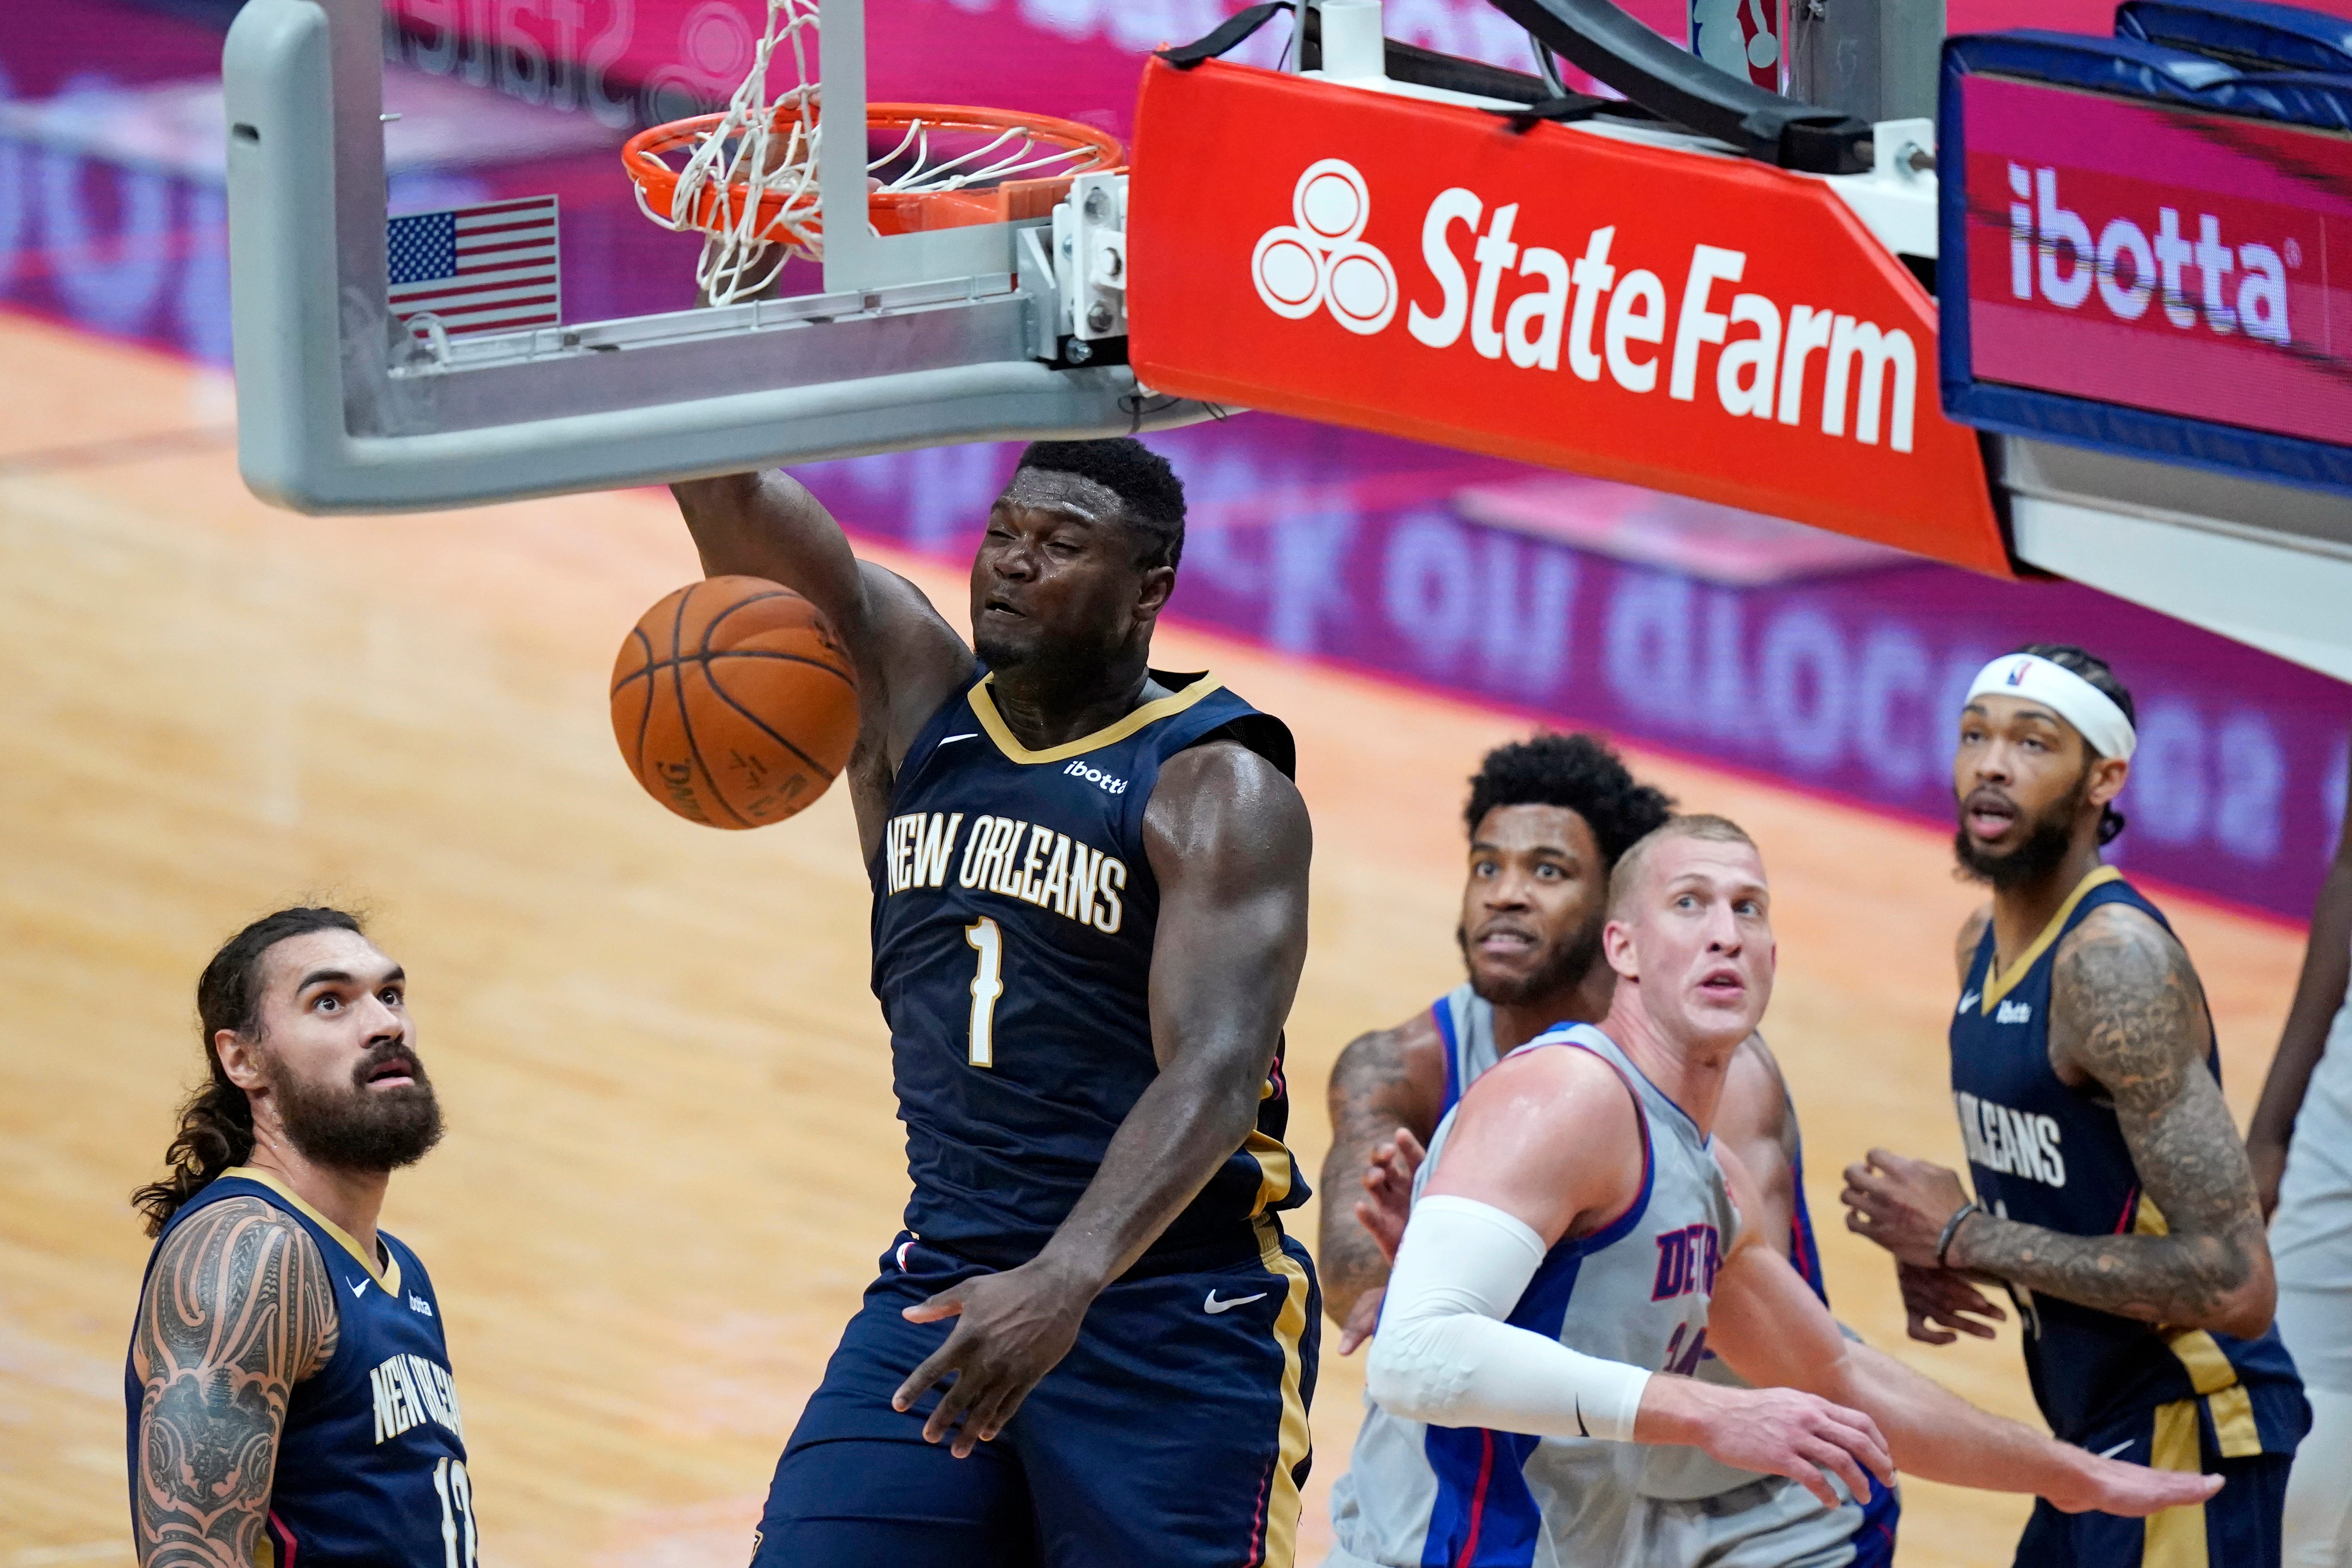 New Orleans Pelicans forward Zion Williamson (1) dunks during the second half of the team's NBA basketball game against the Detroit Pistons in New Orleans, Wednesday, Feb. 24, 2021.